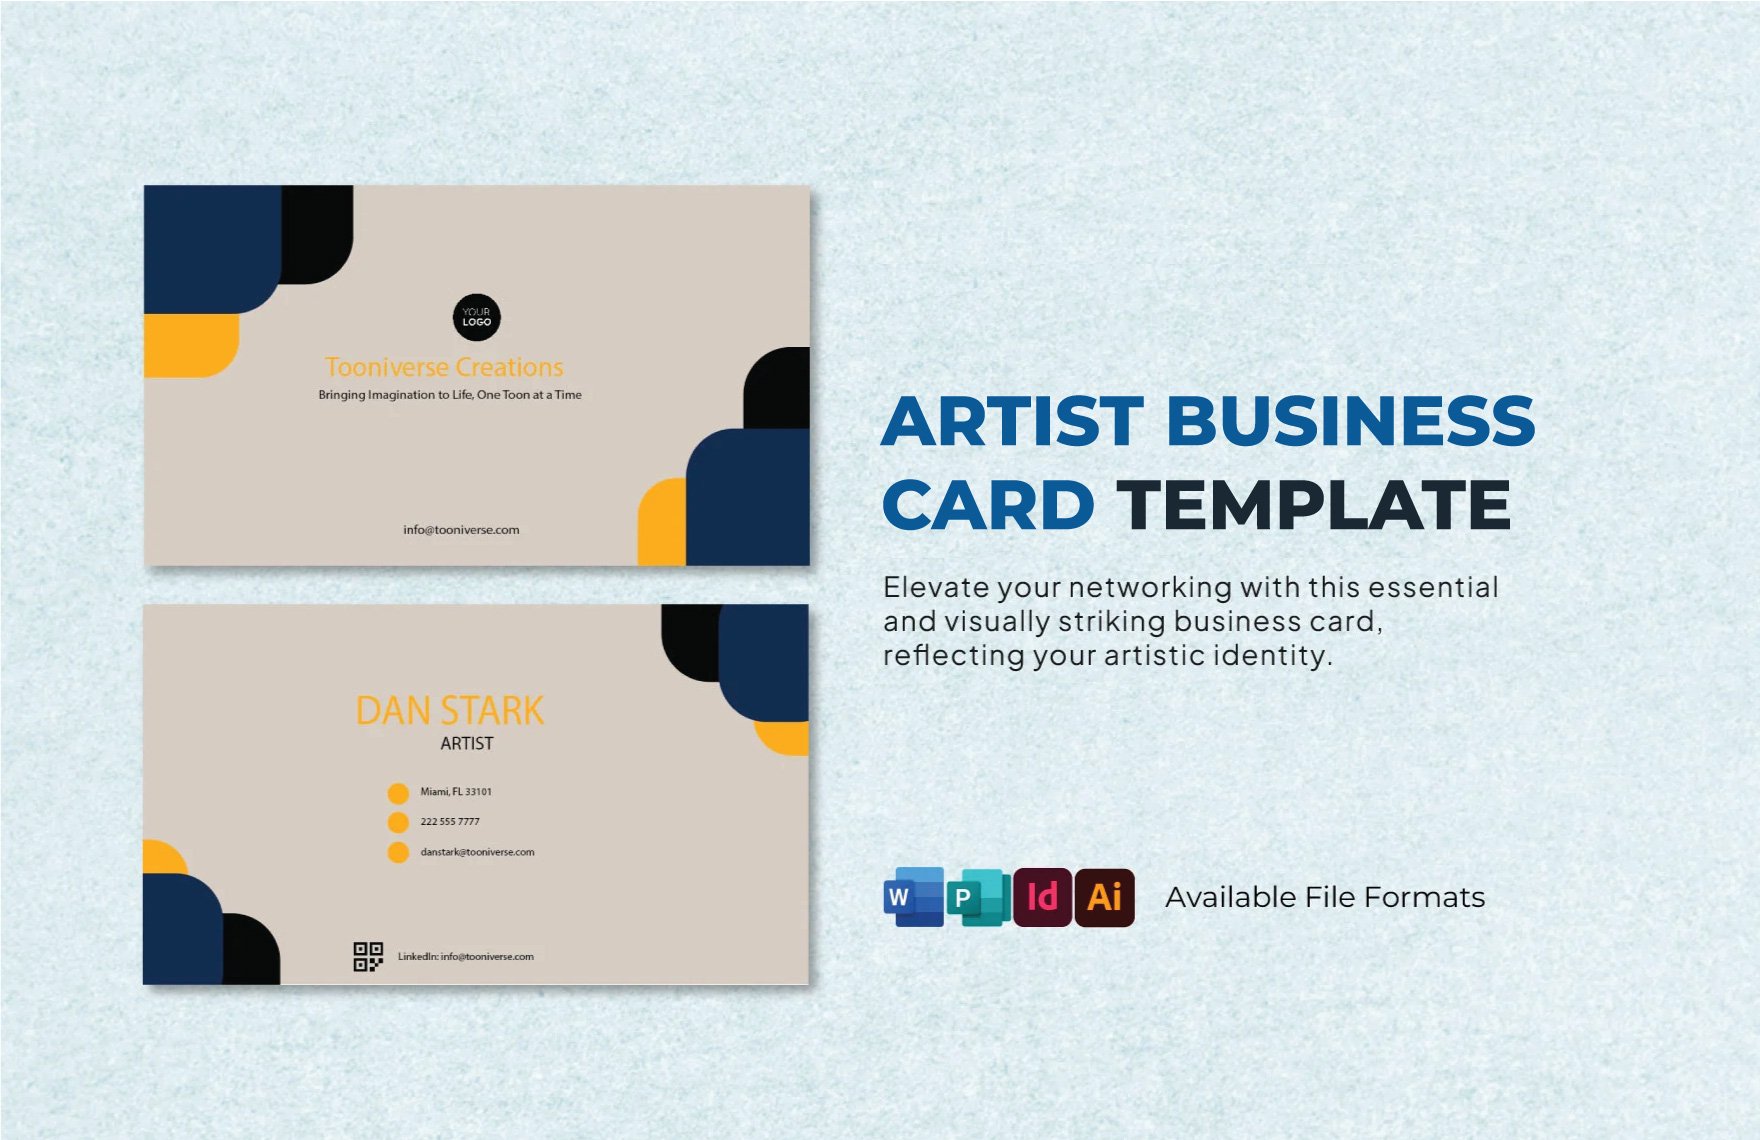 Free Artist Business Card Template in Word, Illustrator, Publisher, InDesign